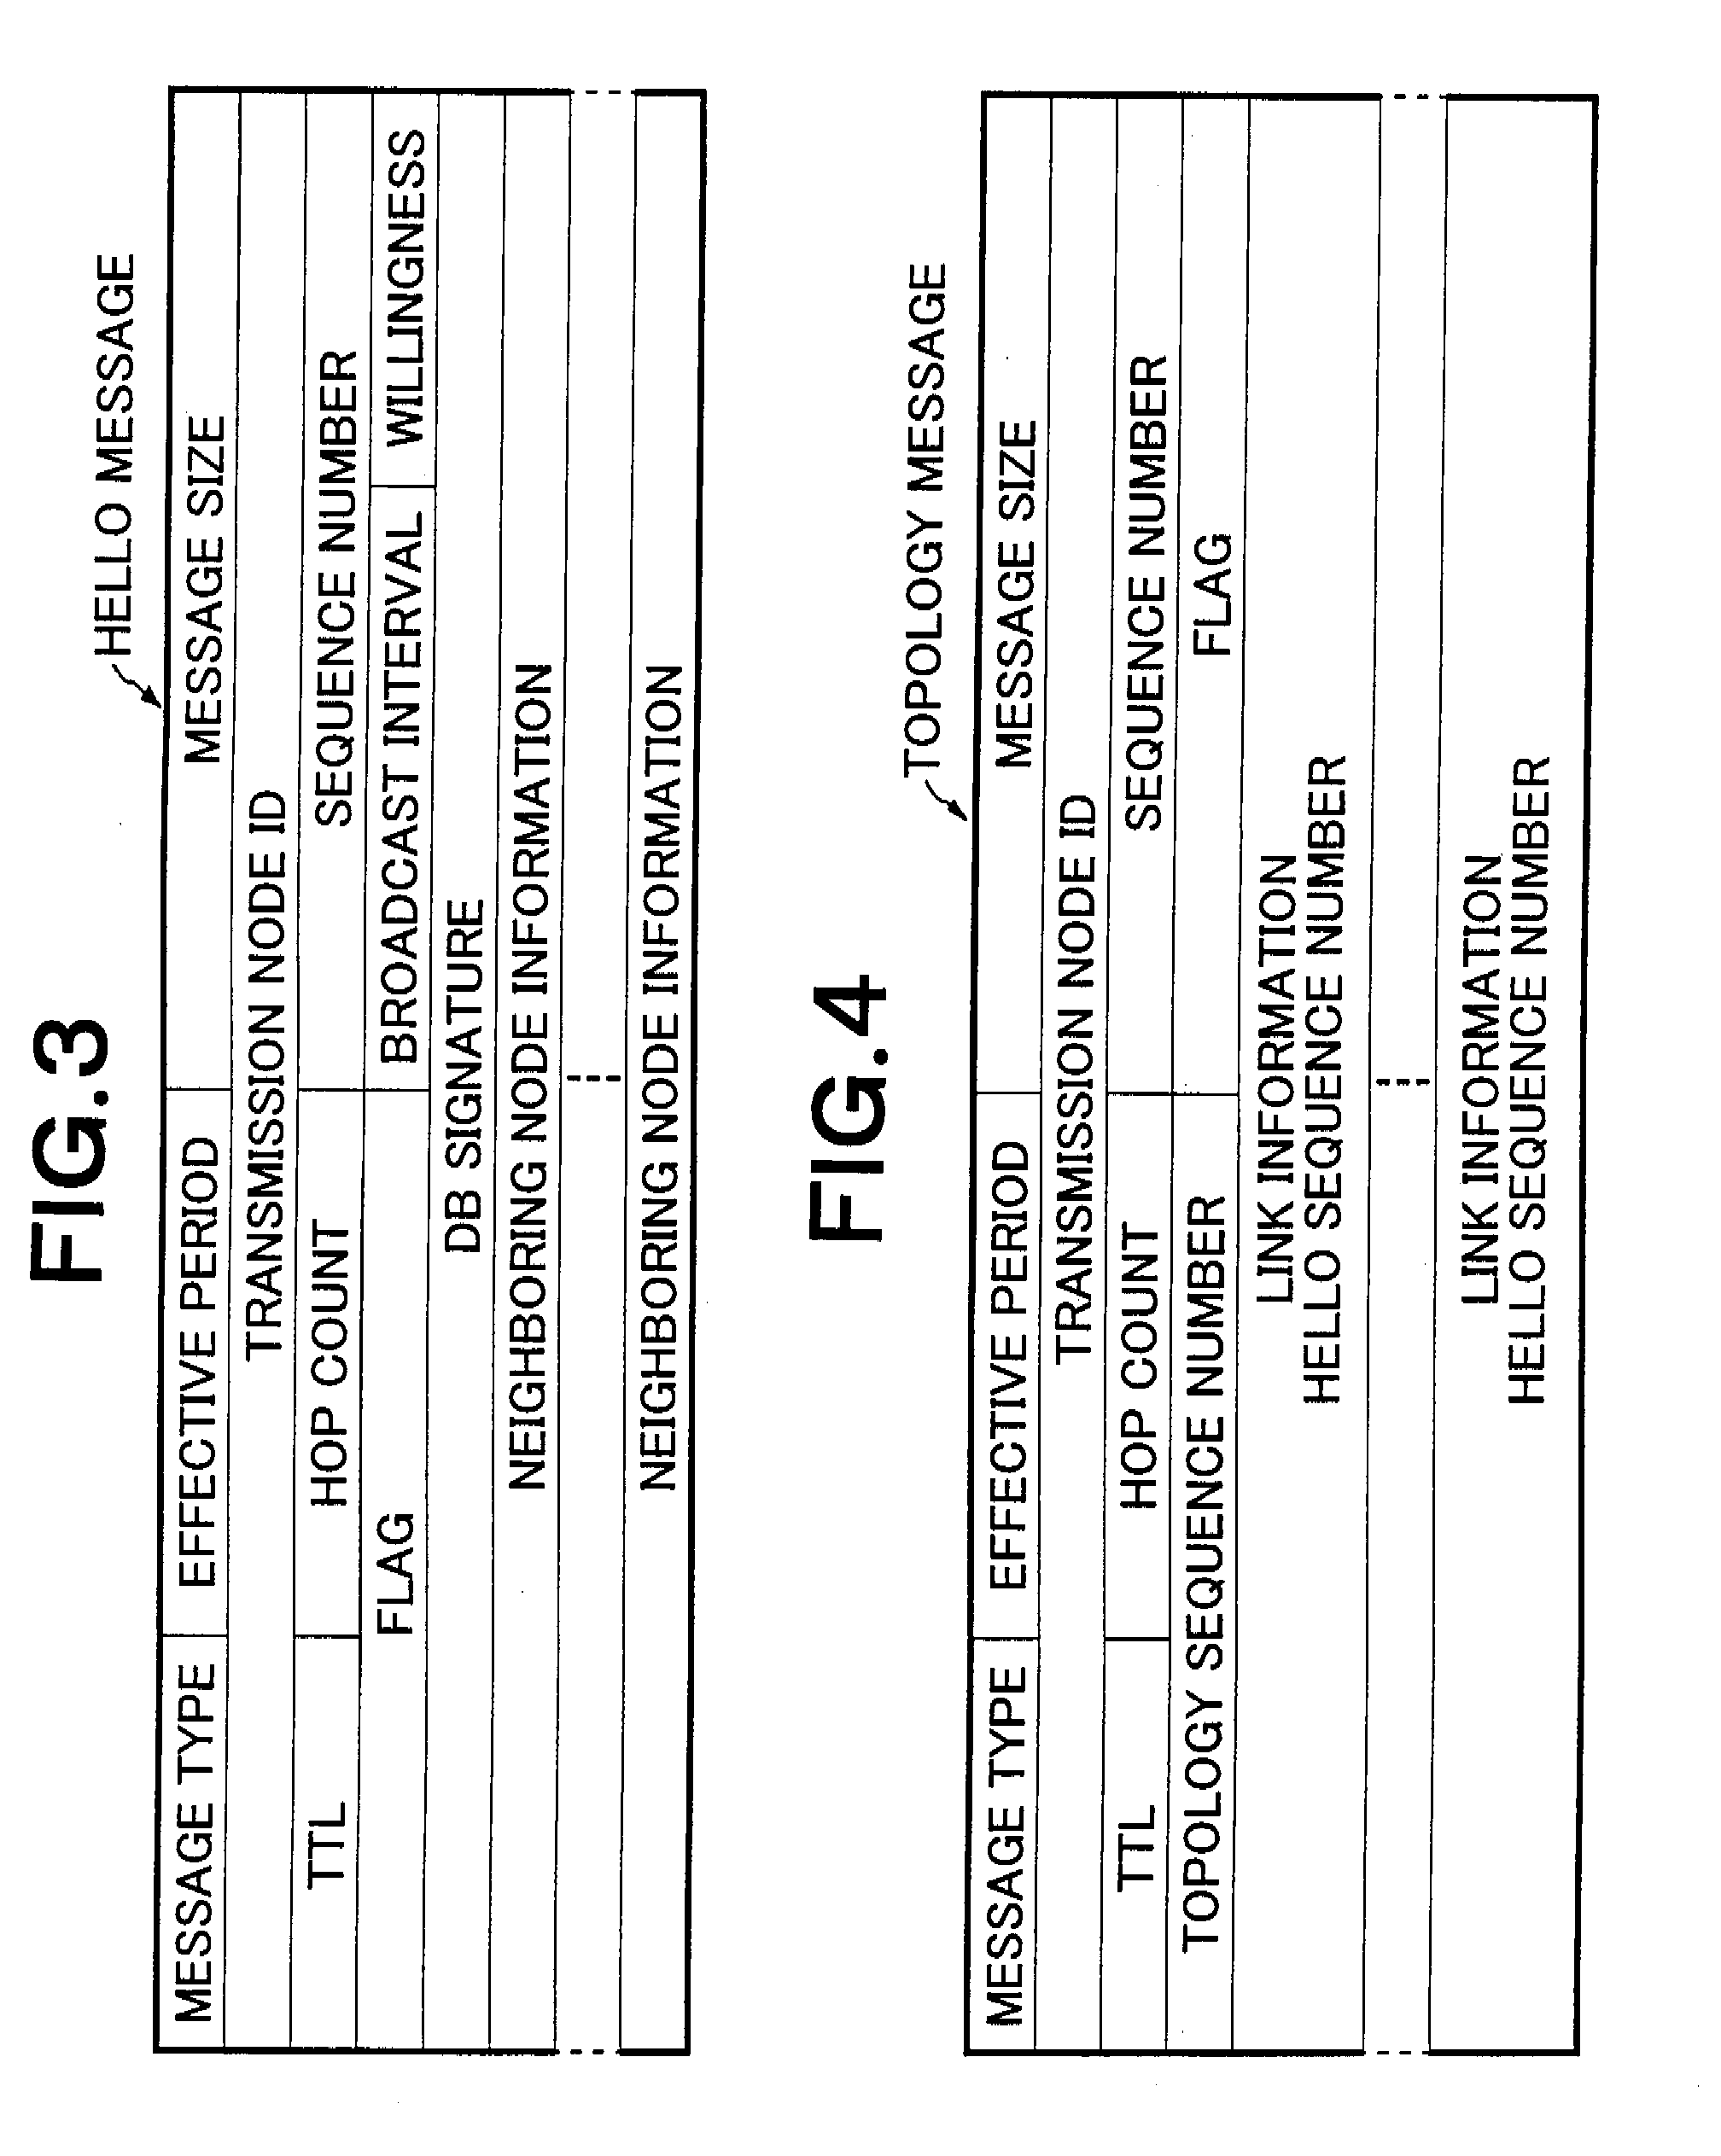 Method For Controlling Communication Route of Wireless Multi-Hop Network System and Communication Terminal